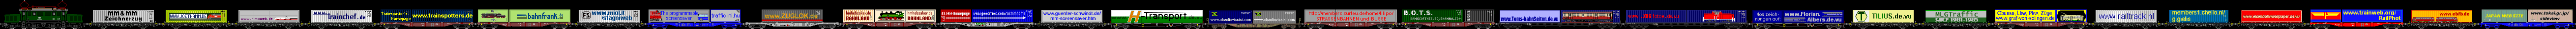 MM&MM screen saver drawers train. If you would like to join in here, simple send a drawing of your containers to pierre@trainspotters.de